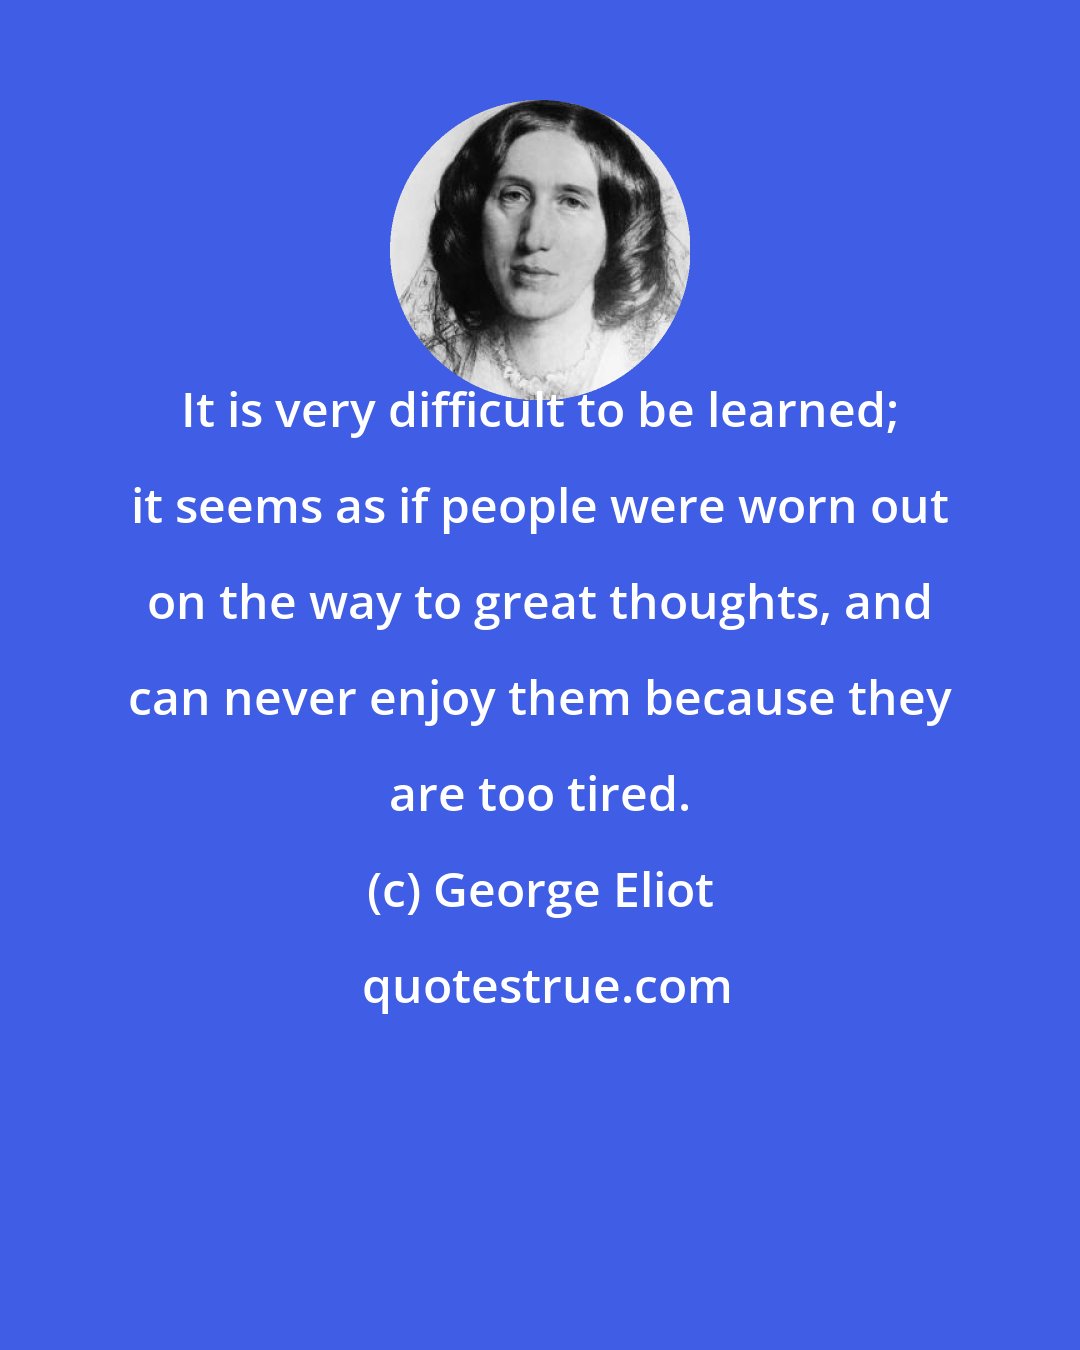 George Eliot: It is very difficult to be learned; it seems as if people were worn out on the way to great thoughts, and can never enjoy them because they are too tired.